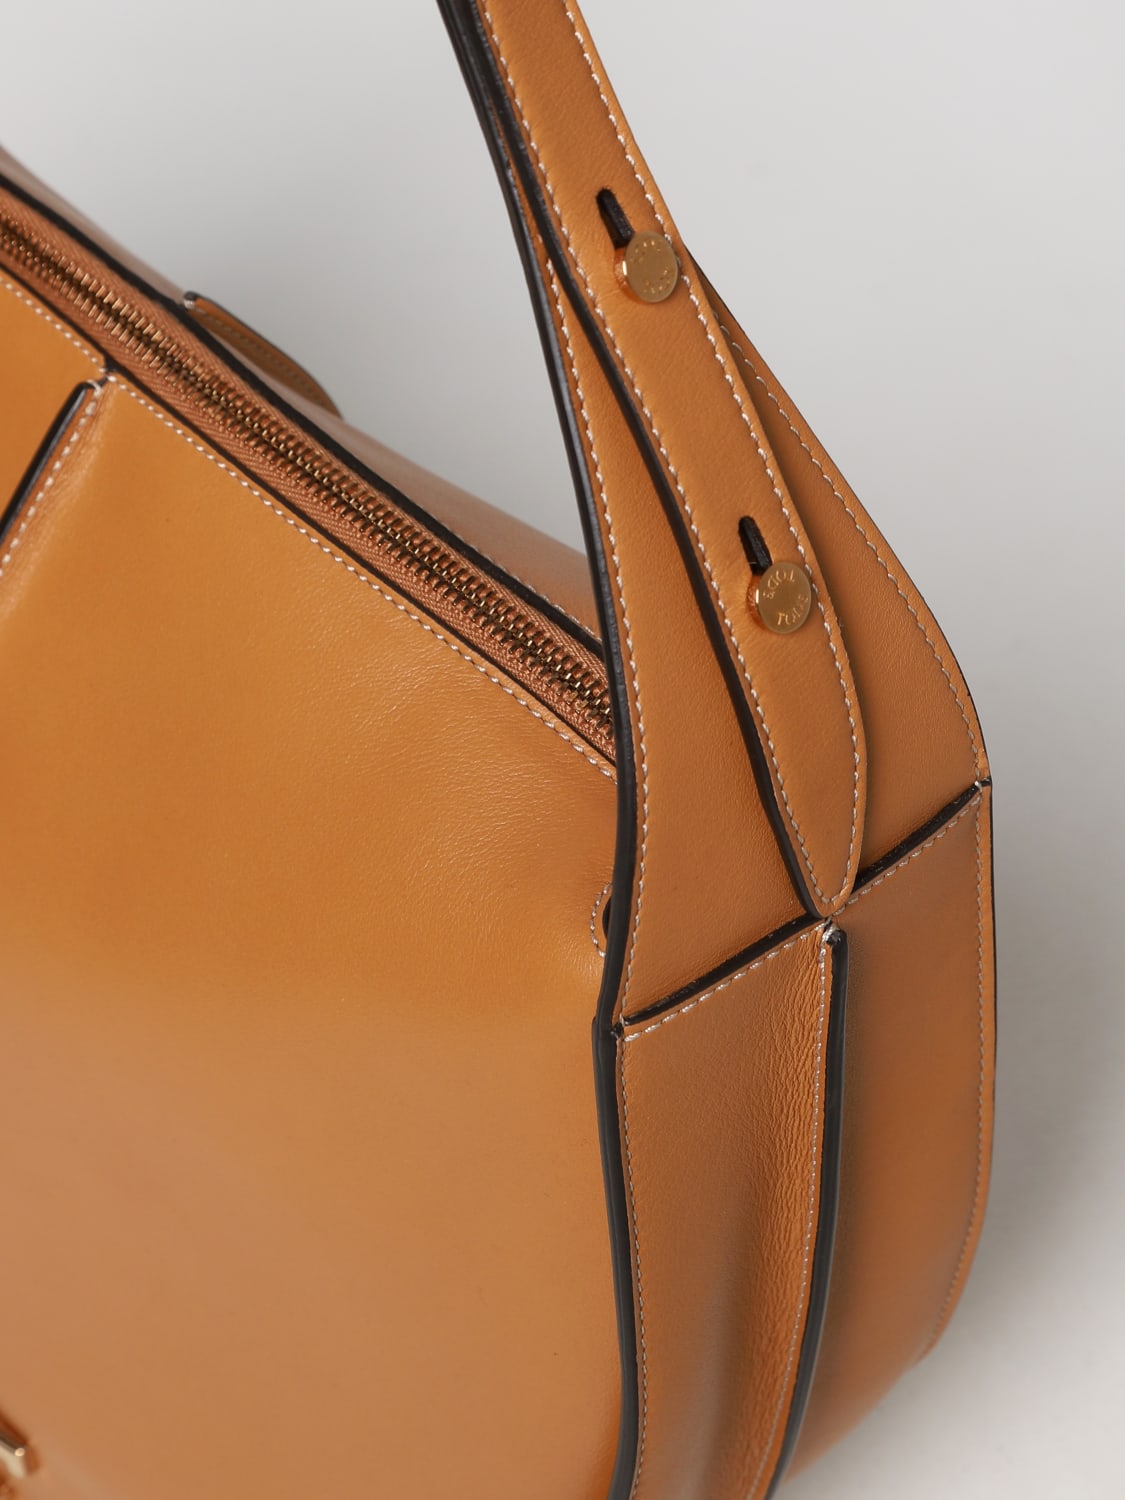 Leather Bags & Totes, Timeless Styles